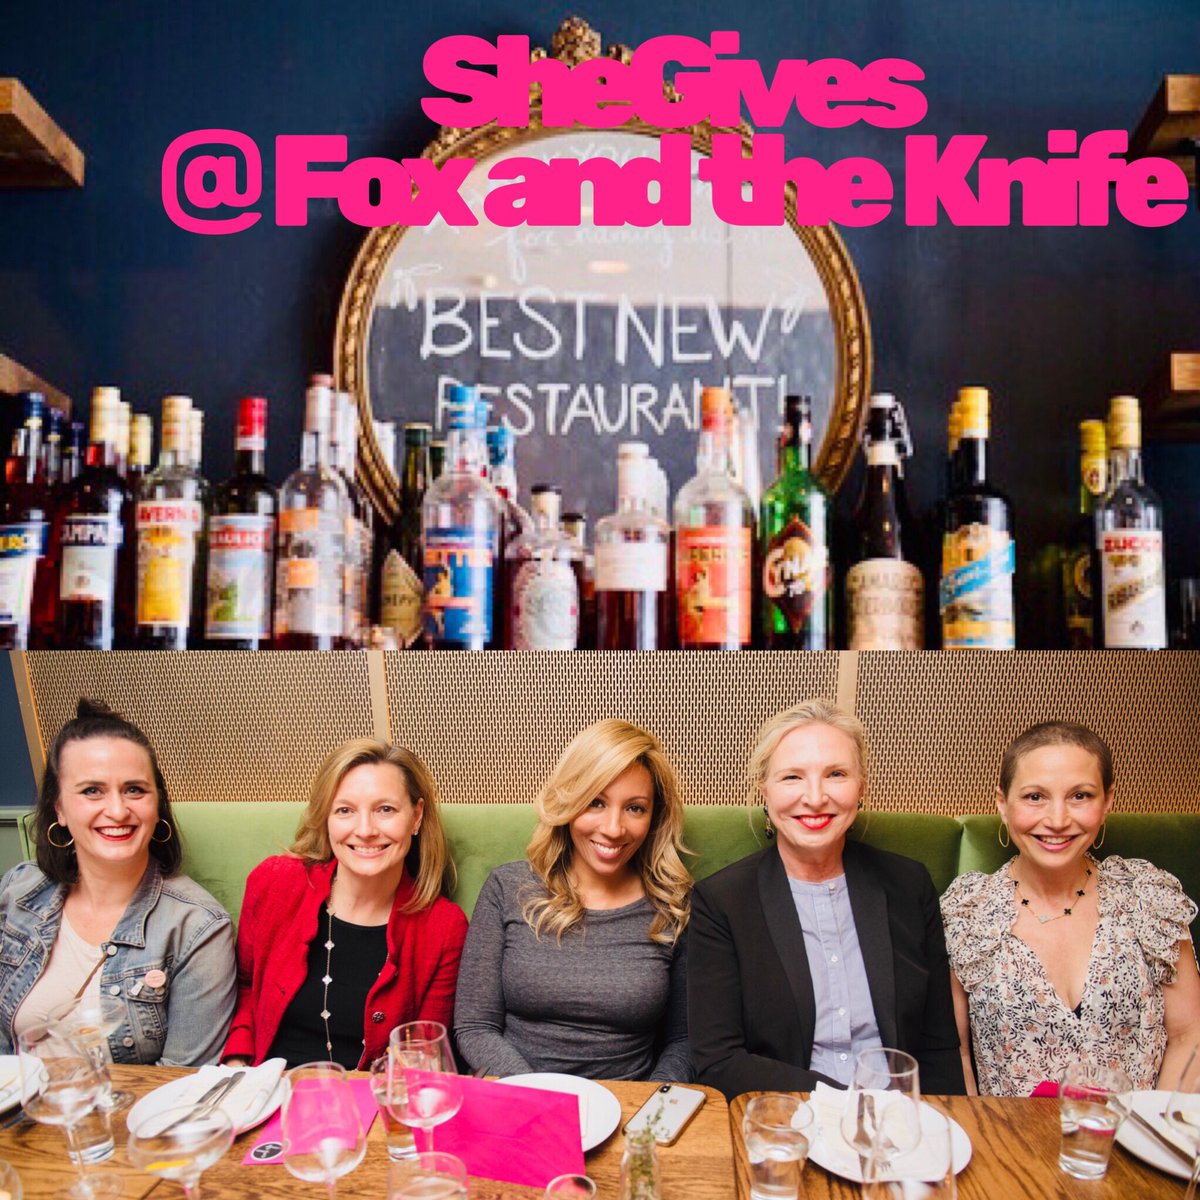 SheGives had fun and ate well at ⁦@KAkunowicz⁩ new restaurant Fox and the Knife just named one of America’s best new restaurants by ⁦⁦@foodandwine⁩! Thanks for being there ⁦@Veronicatheblog⁩ ⁦@heykbb⁩